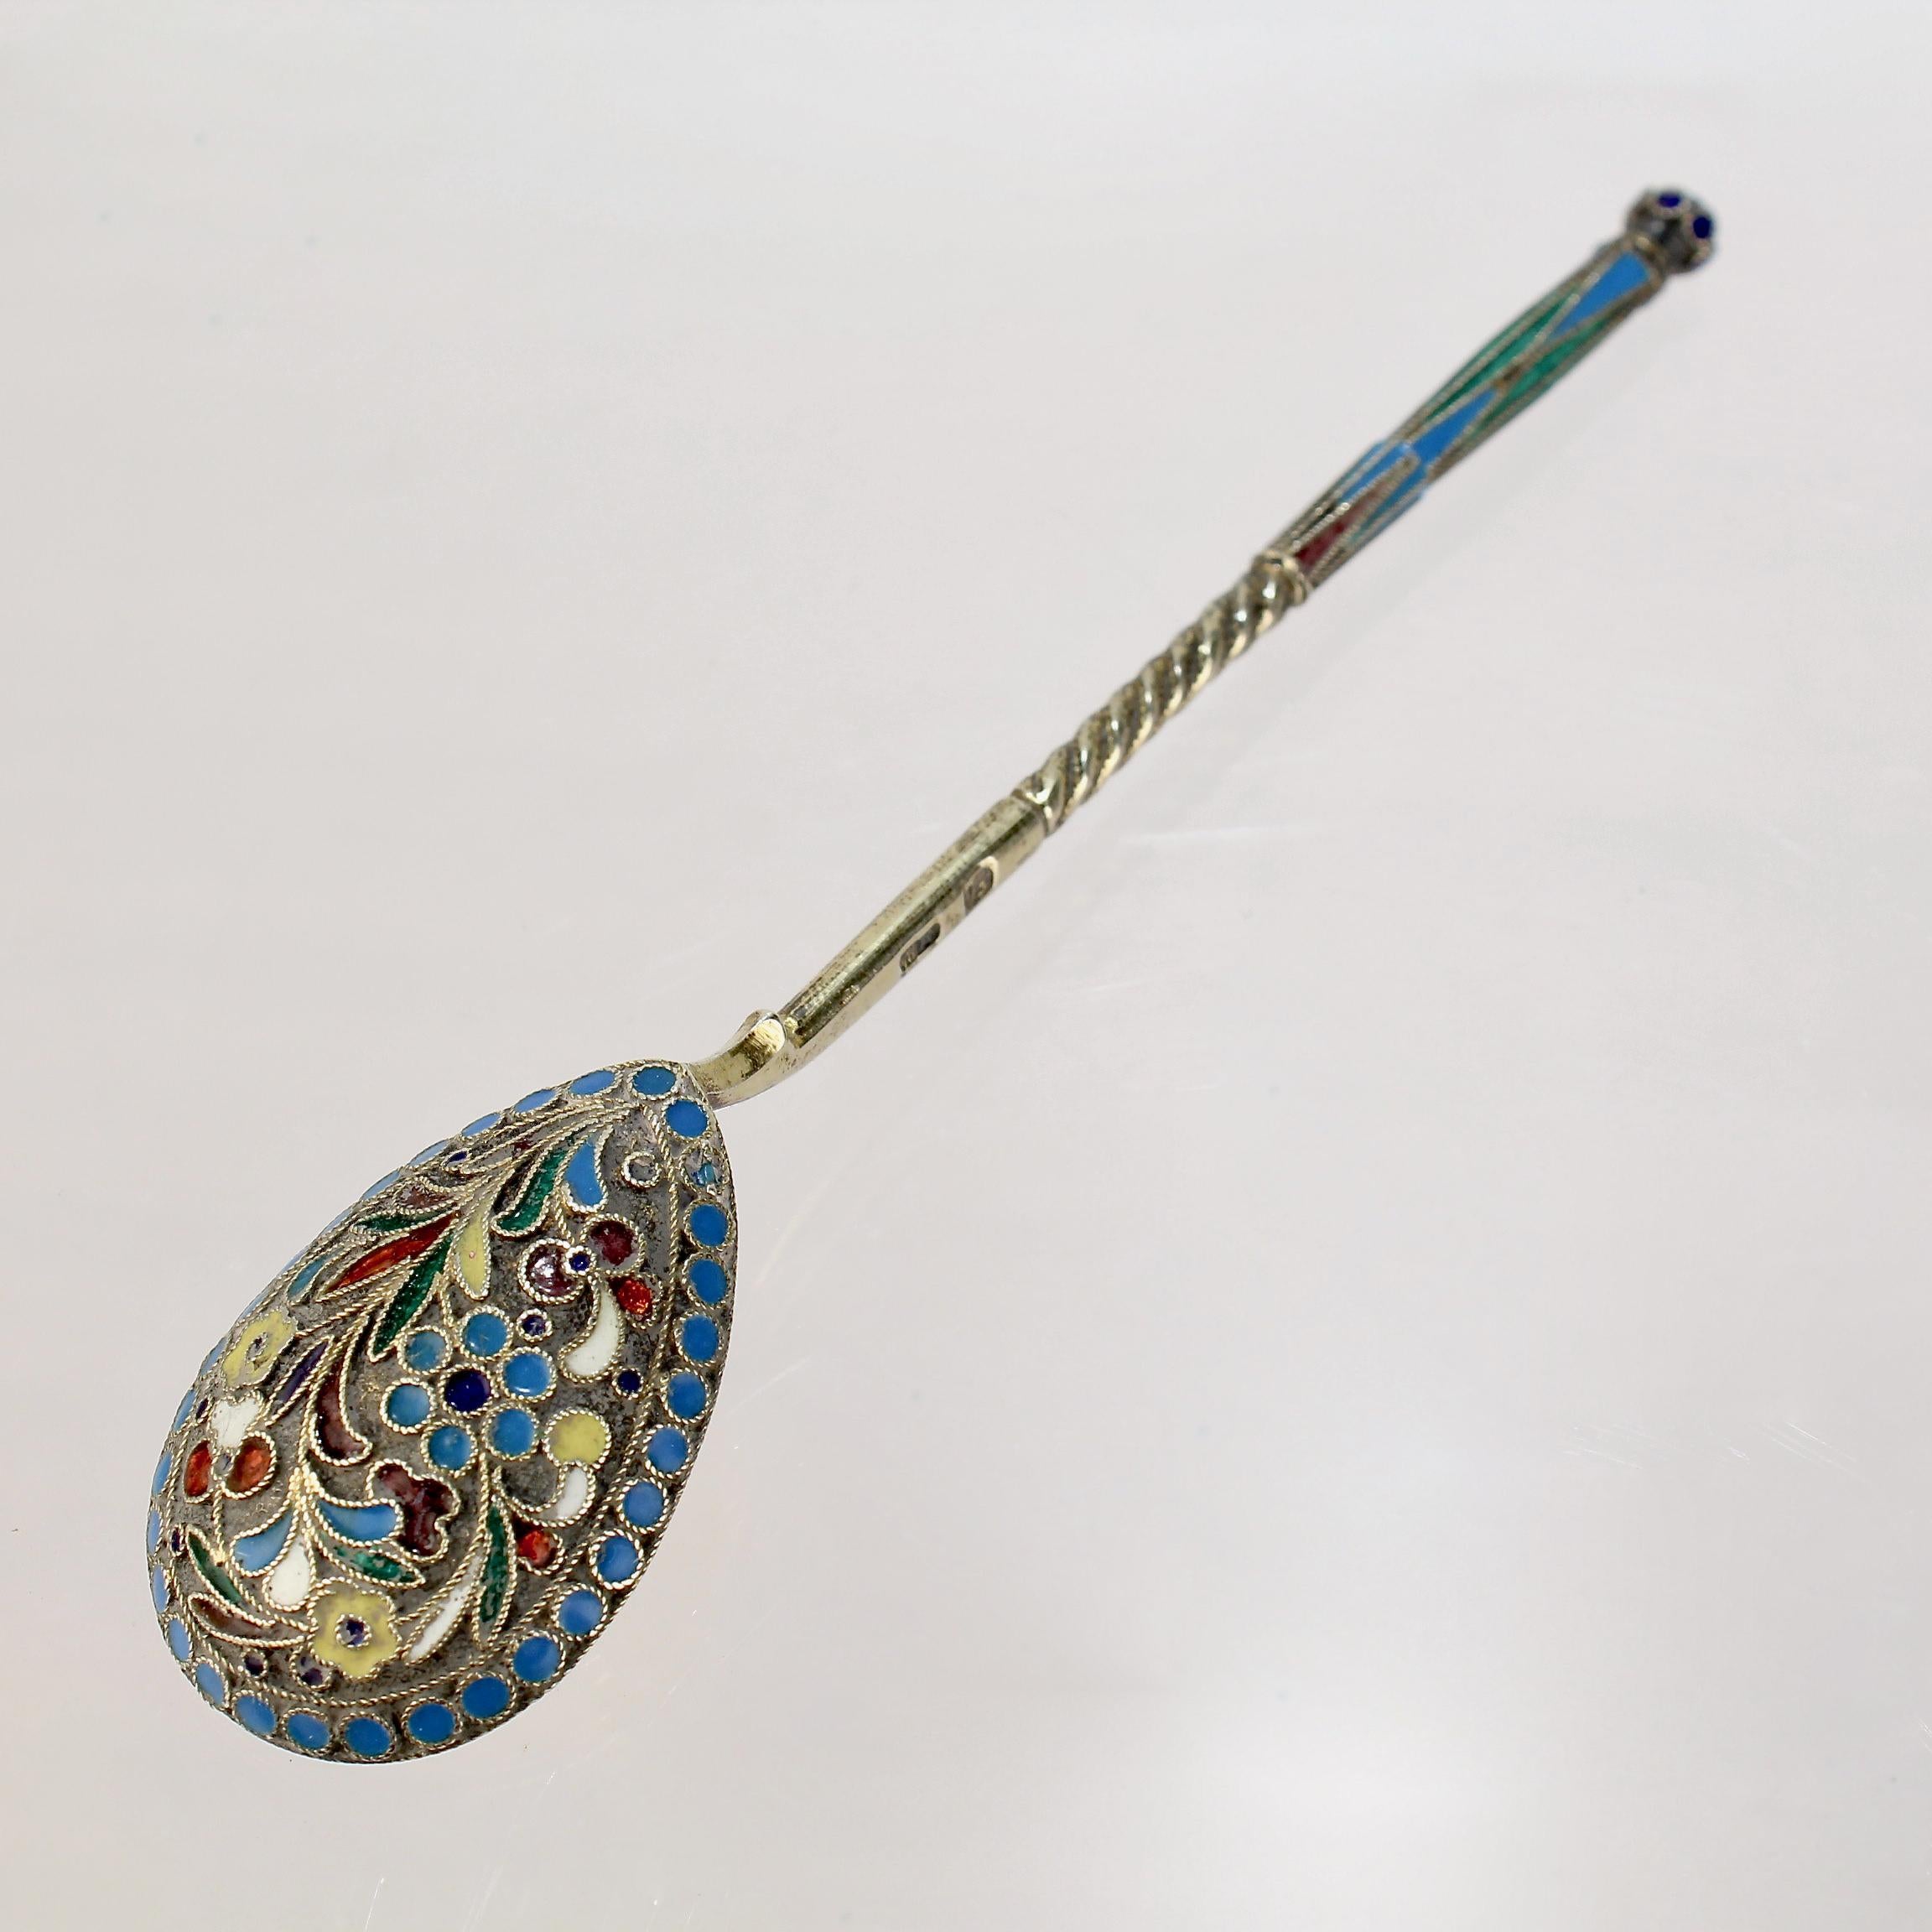 A very fine antique Russian tea or kvosh spoon.

By Eros Samoschin.

With polychrome cloisonné enamel decoration to both the front and back.

Simply a wonderful piece of Russian silver!

Date:
Late 19th or Early 20th Century

Overall Condition:
It